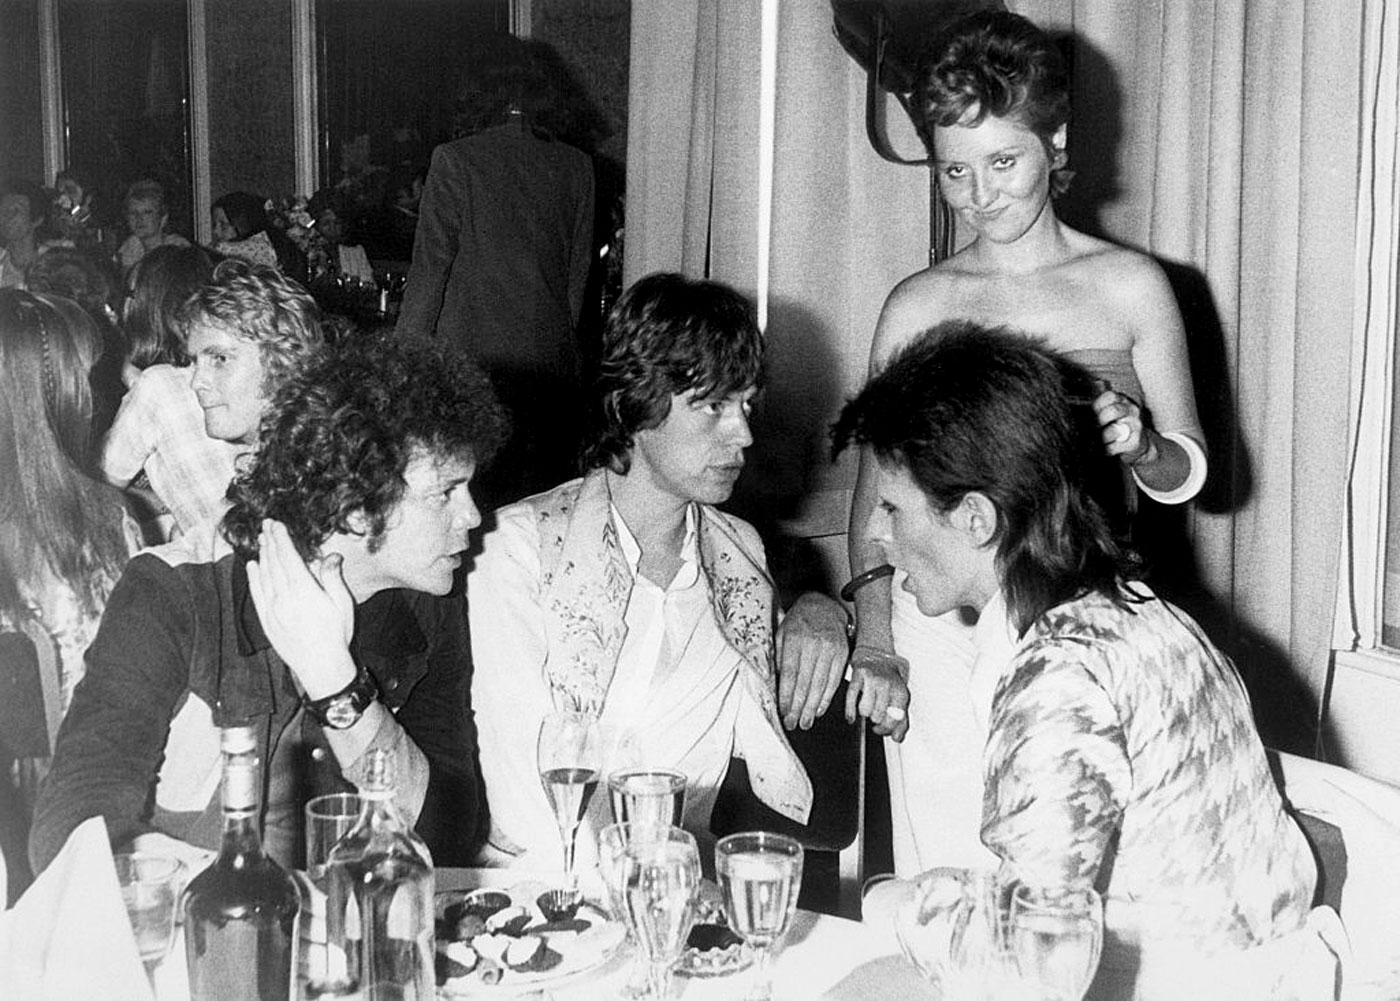                             Lou Reed, Mick Jagger, and David Bowie in conversation at Bowie&#x2019;s &#x2018;Last Supper&#x2019;